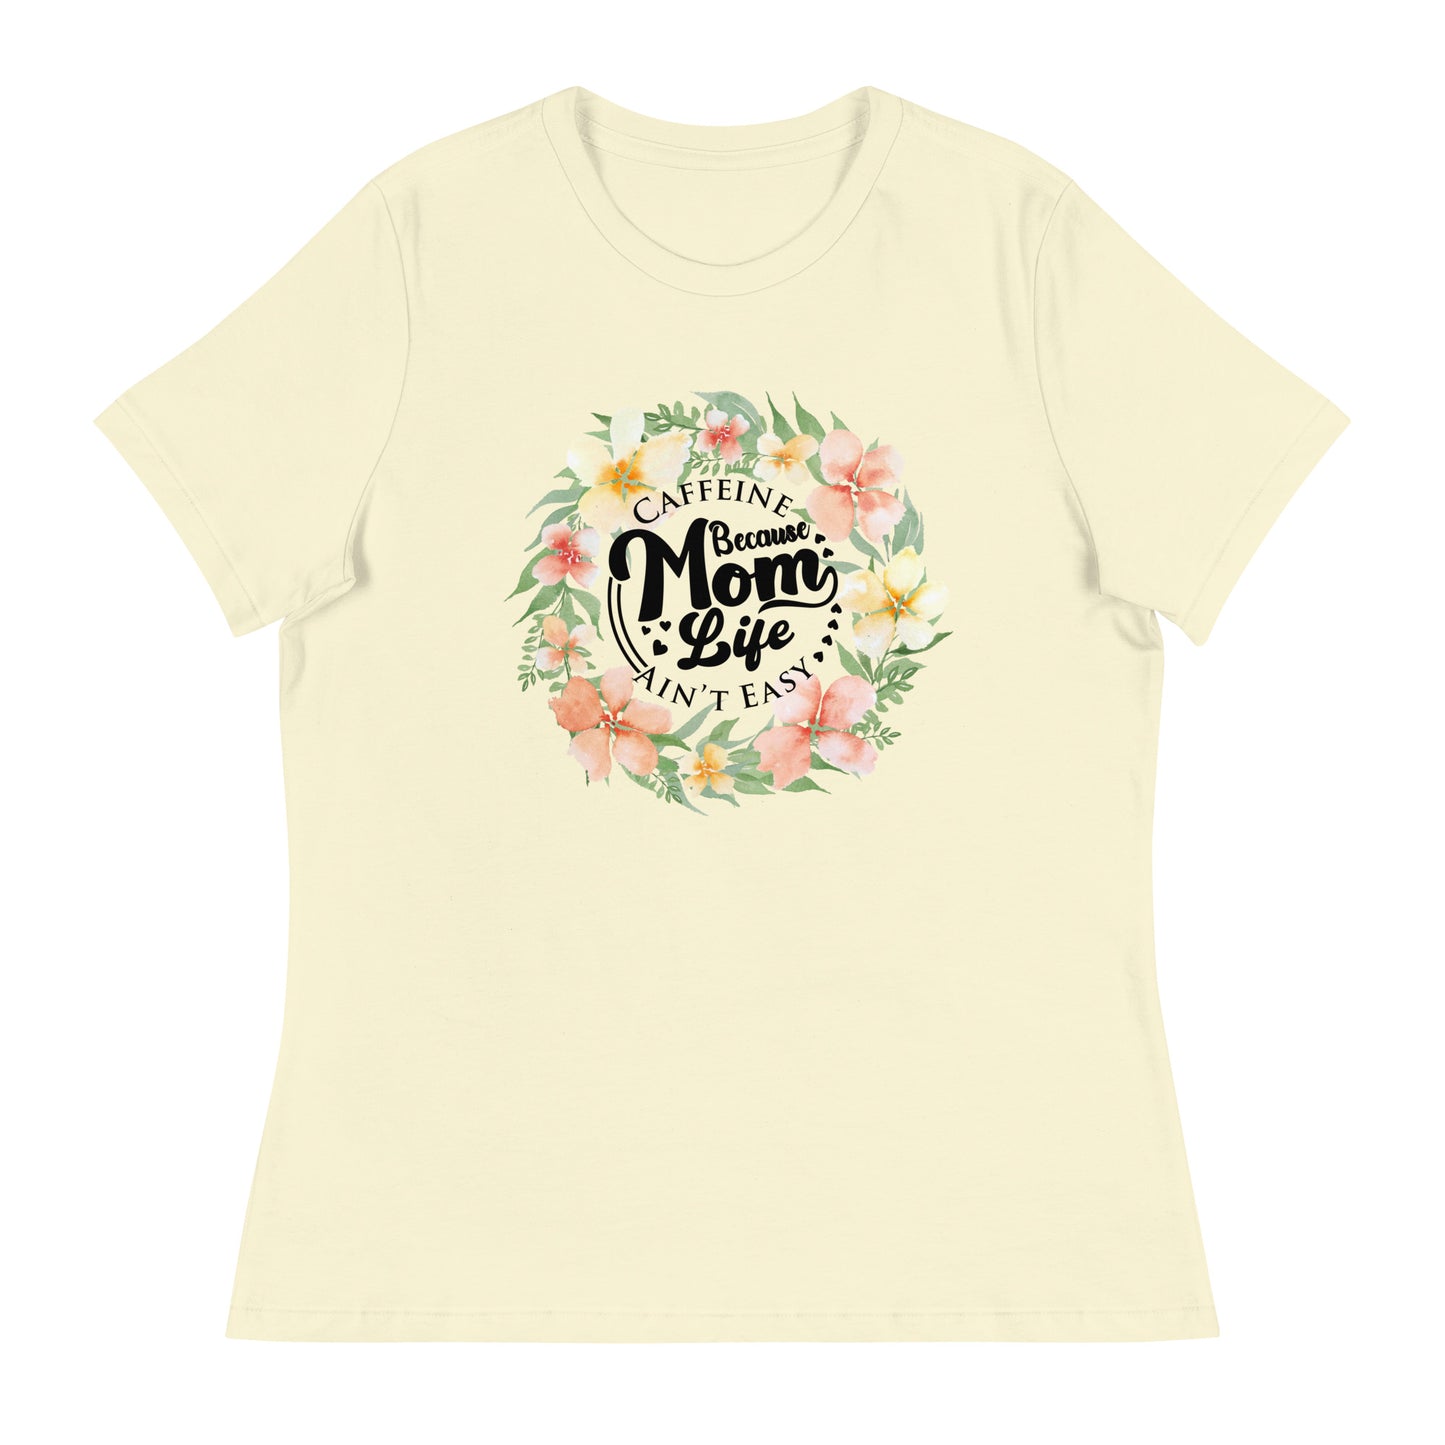 Caffein because mom life is not easyWomen's Relaxed T-Shirt